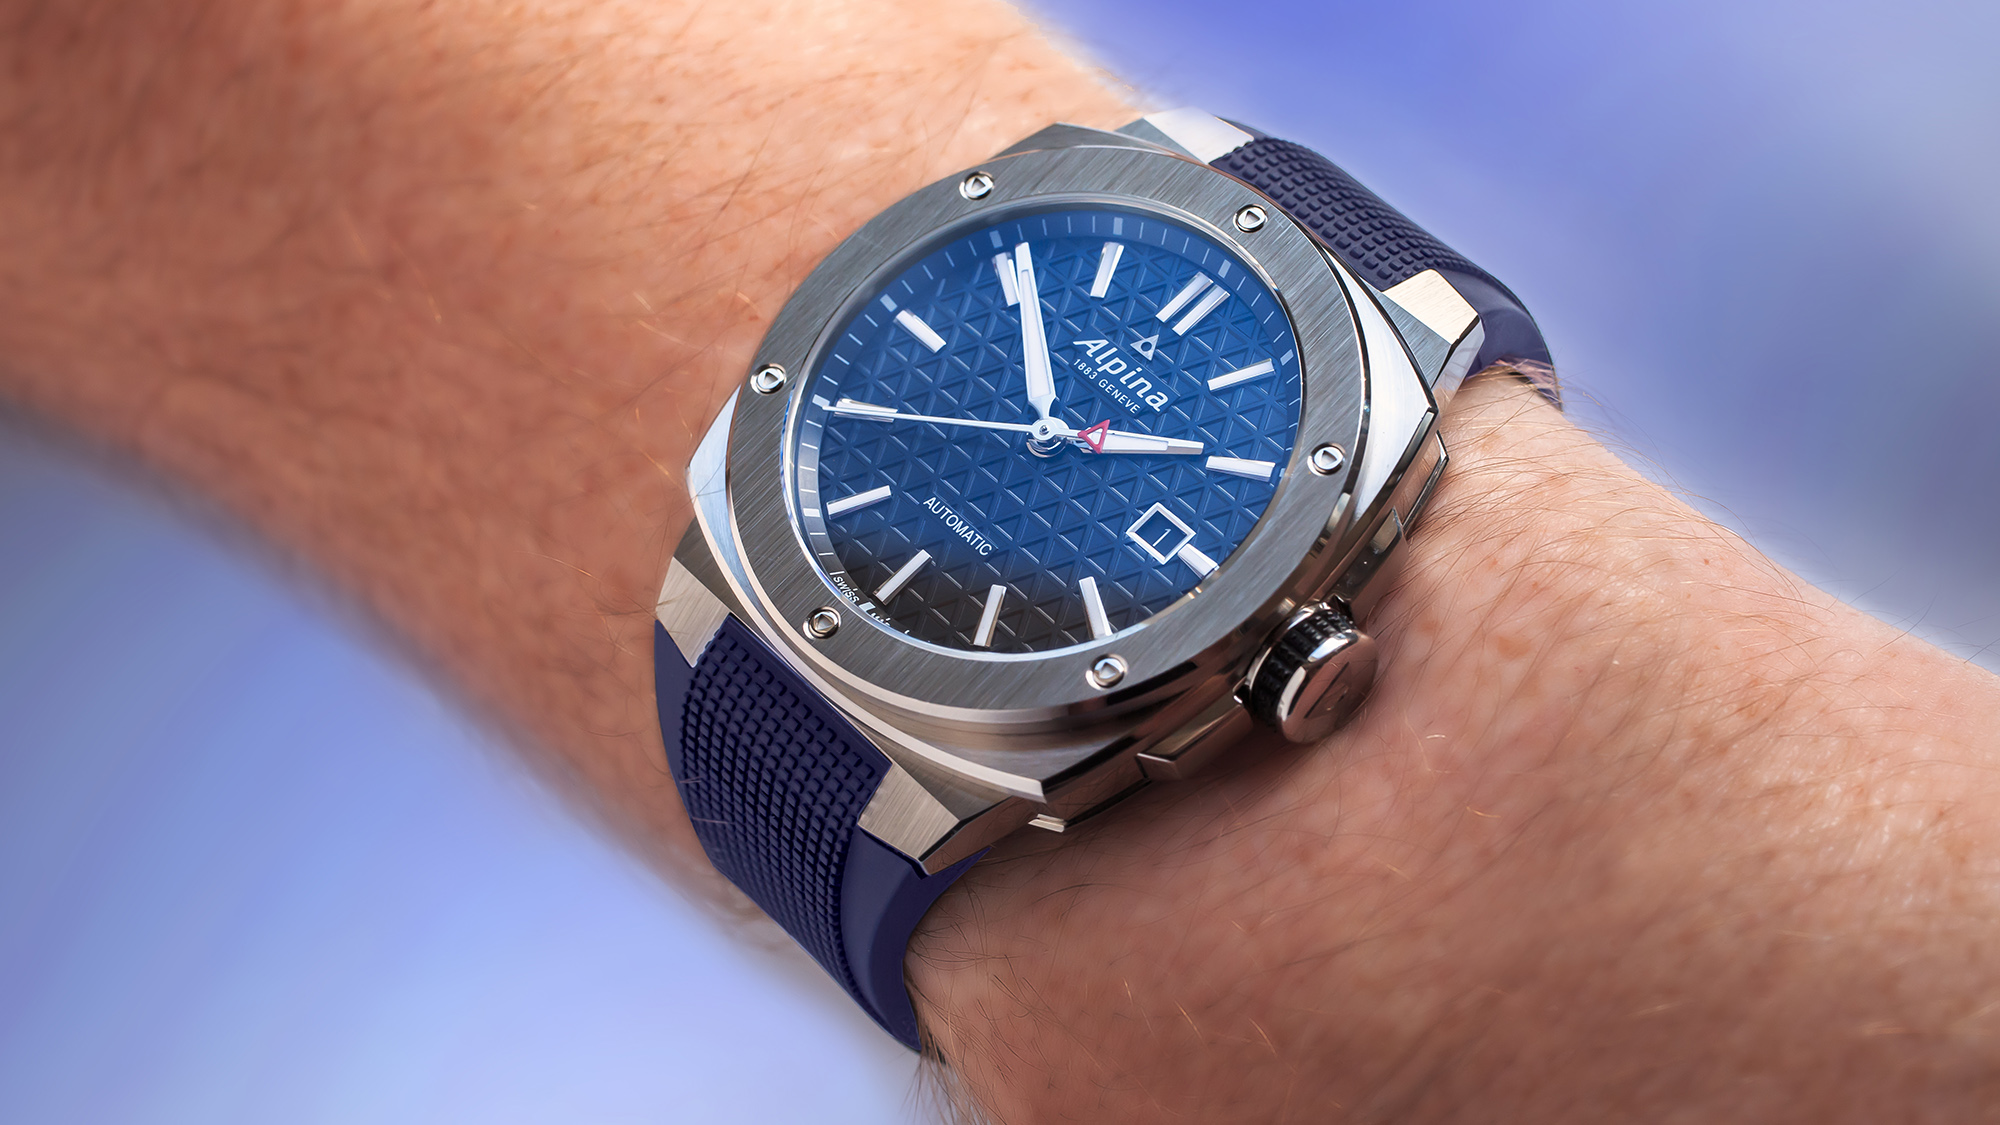 Alpina Reinvents An Outdoor Icon With The Alpiner Extreme Automatic Watch  Line | aBlogtoWatch